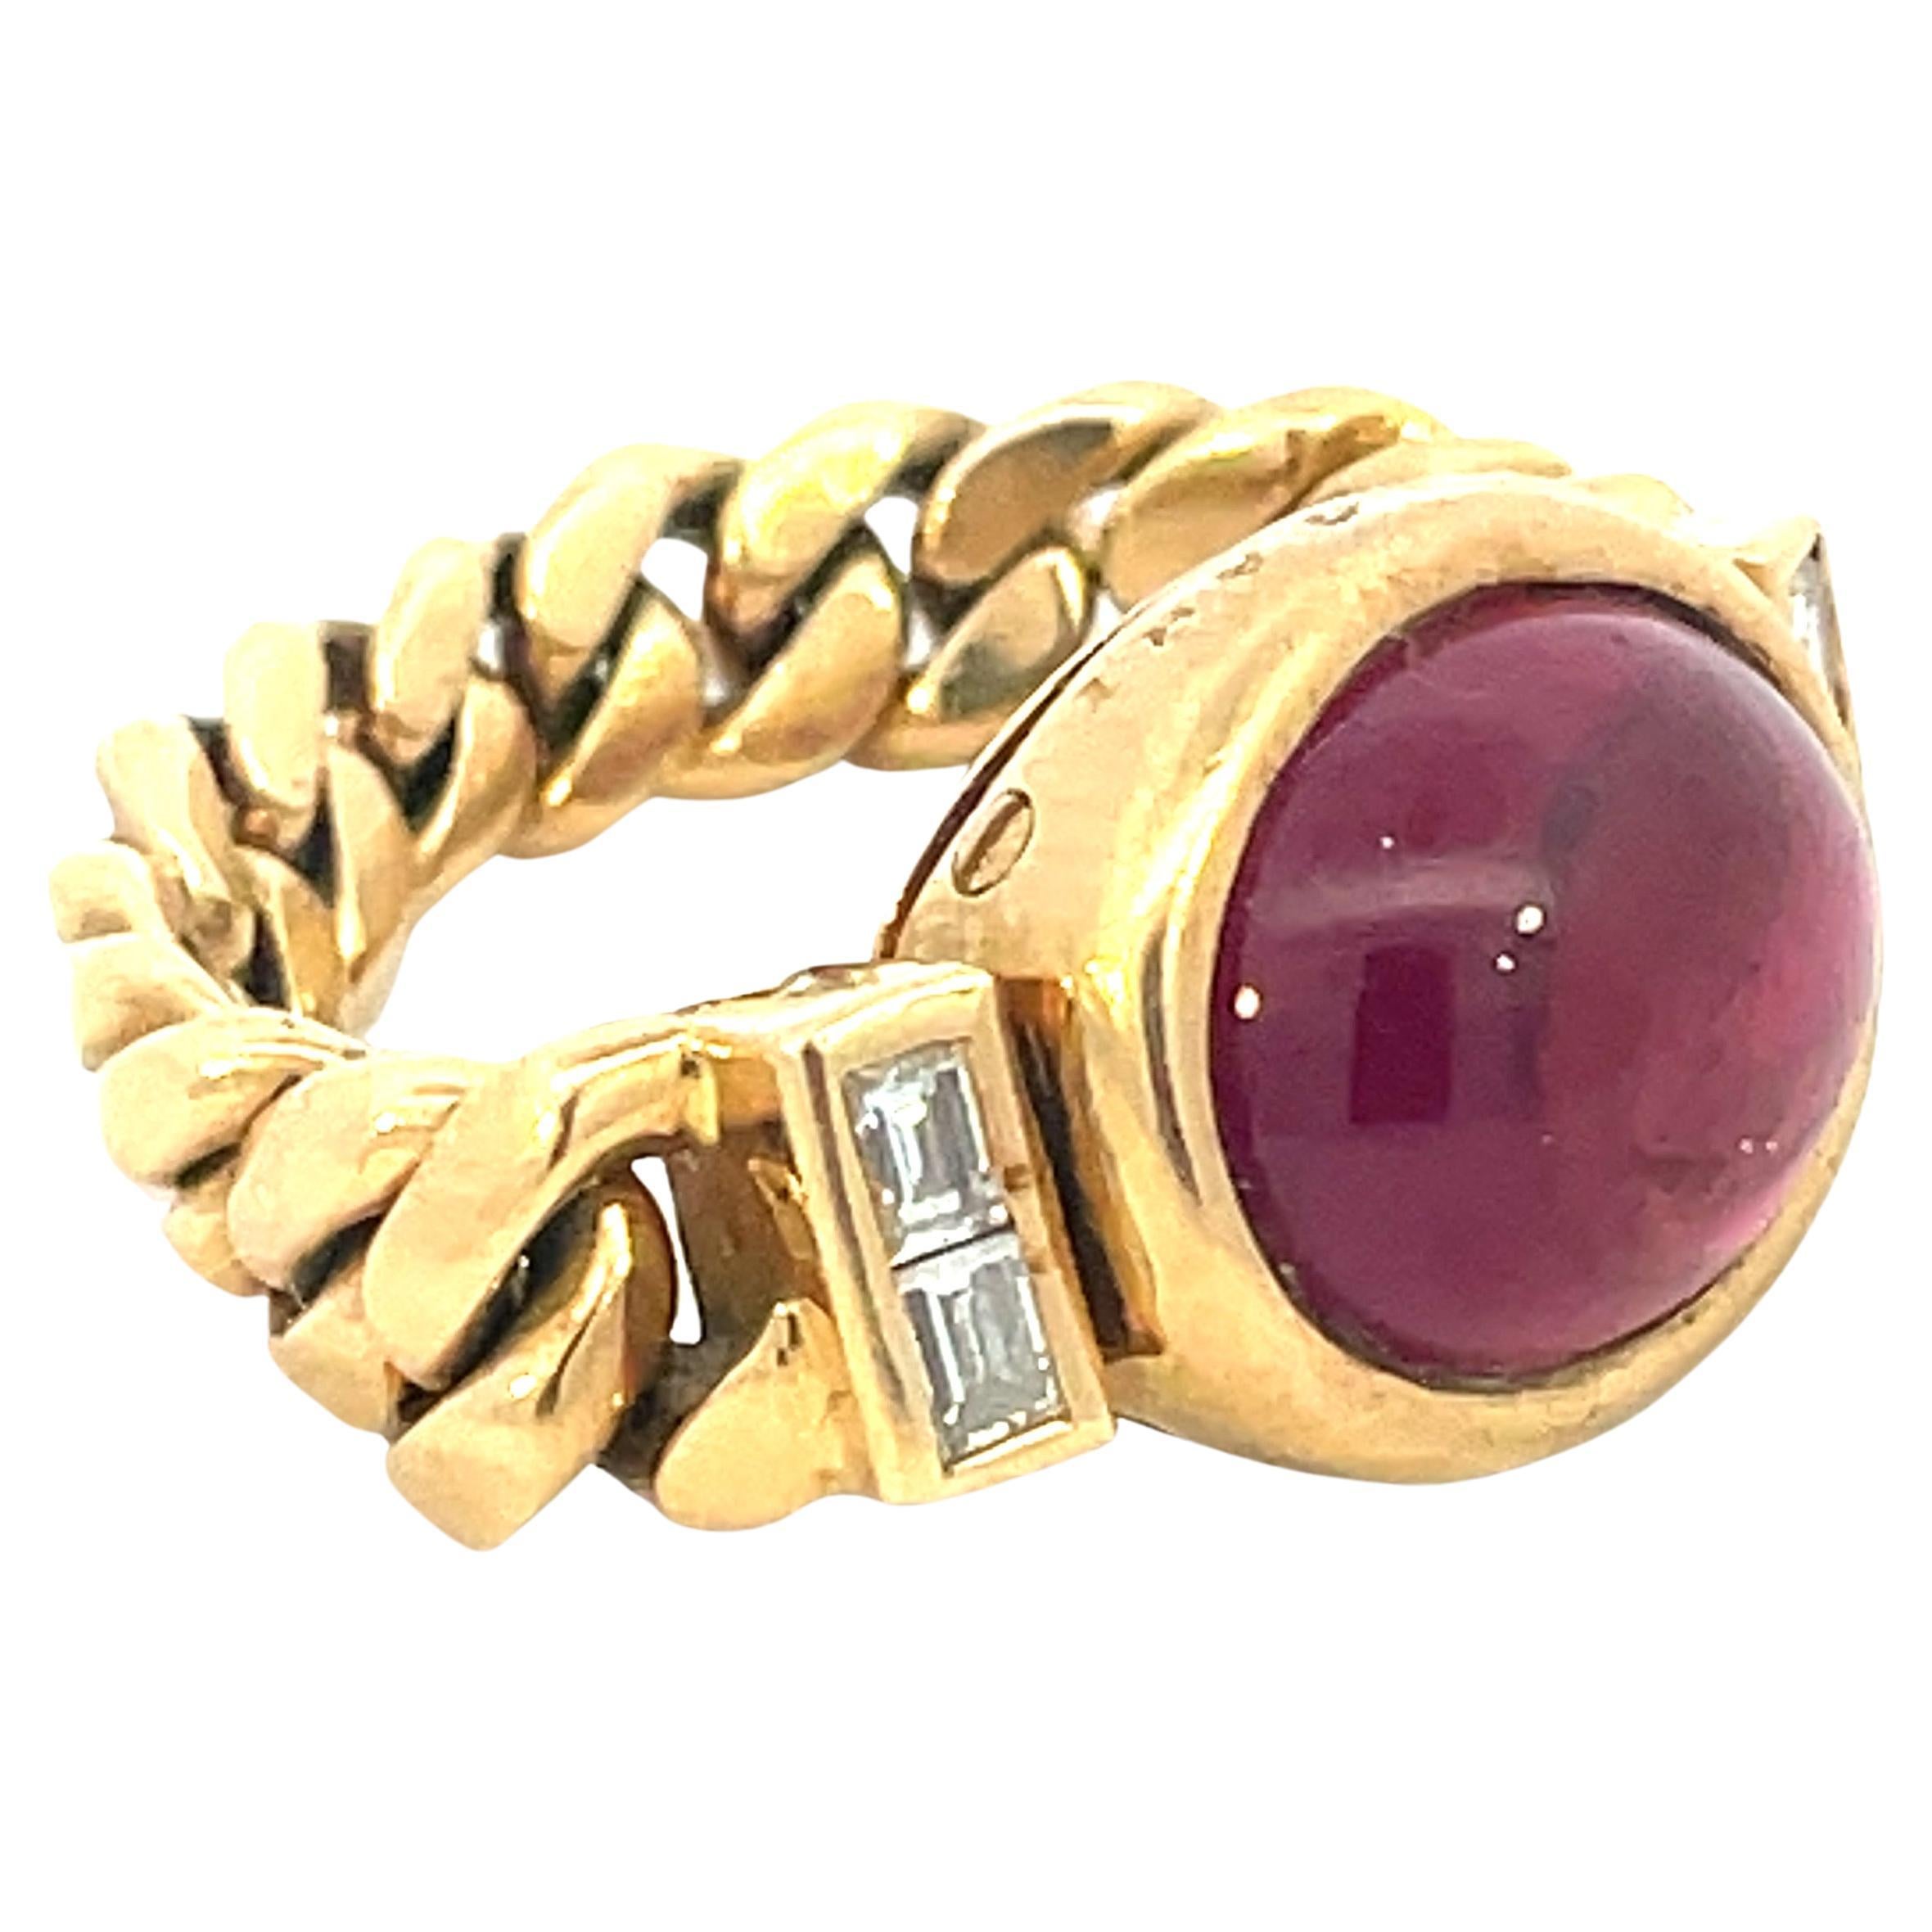 Beautifully designed and masterfully handcrafted by the famous Italian jeweler Bulgari, this ring features a vibrant Diamond Baguettes and a strongly saturated pink purple Tourmaline Cabochon
The approx weight of The Tourmaline is about 6